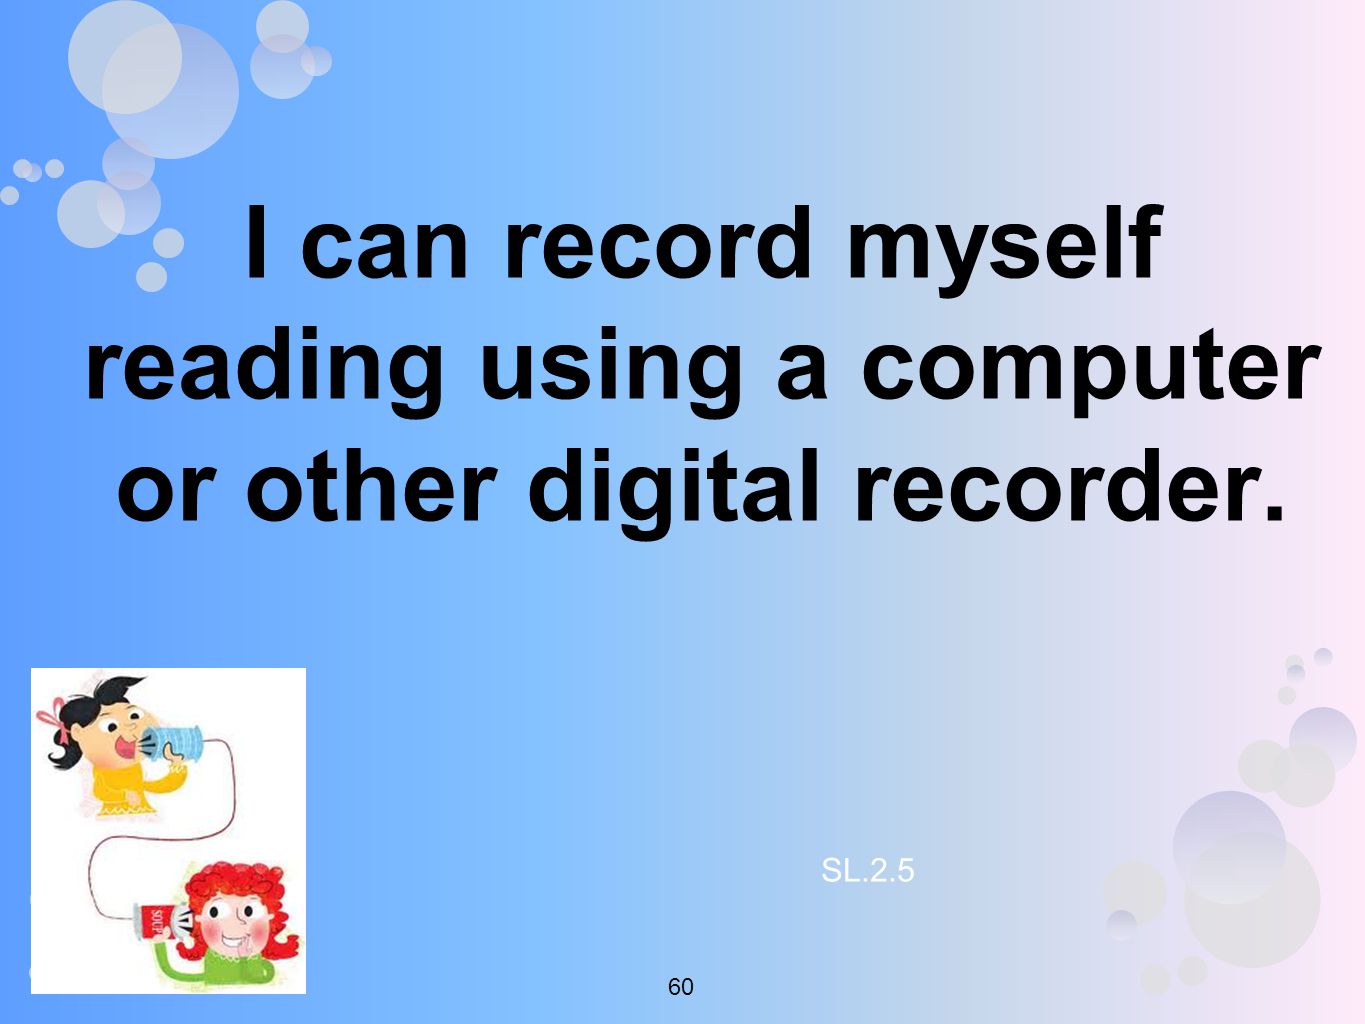 I can record myself reading using a computer or other digital recorder. SL